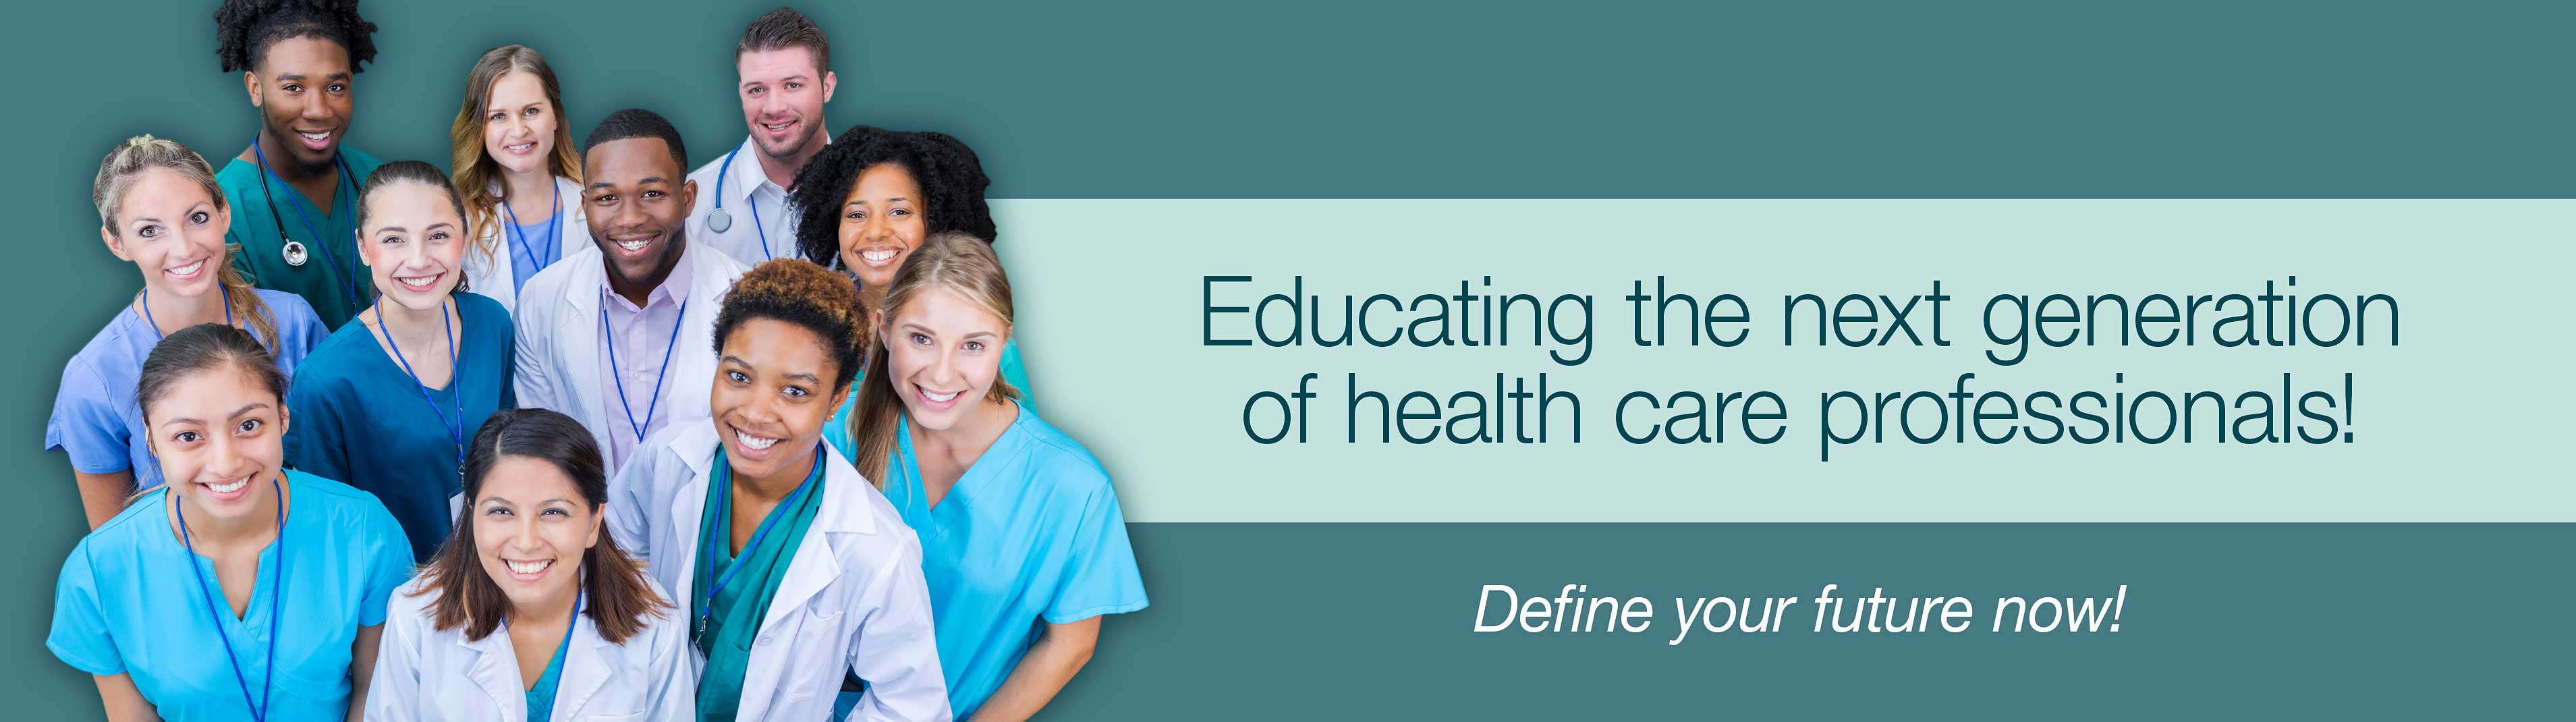 School of Health Professions - Prospective Students - Educating the next generation of health care professionals. Define your future now!